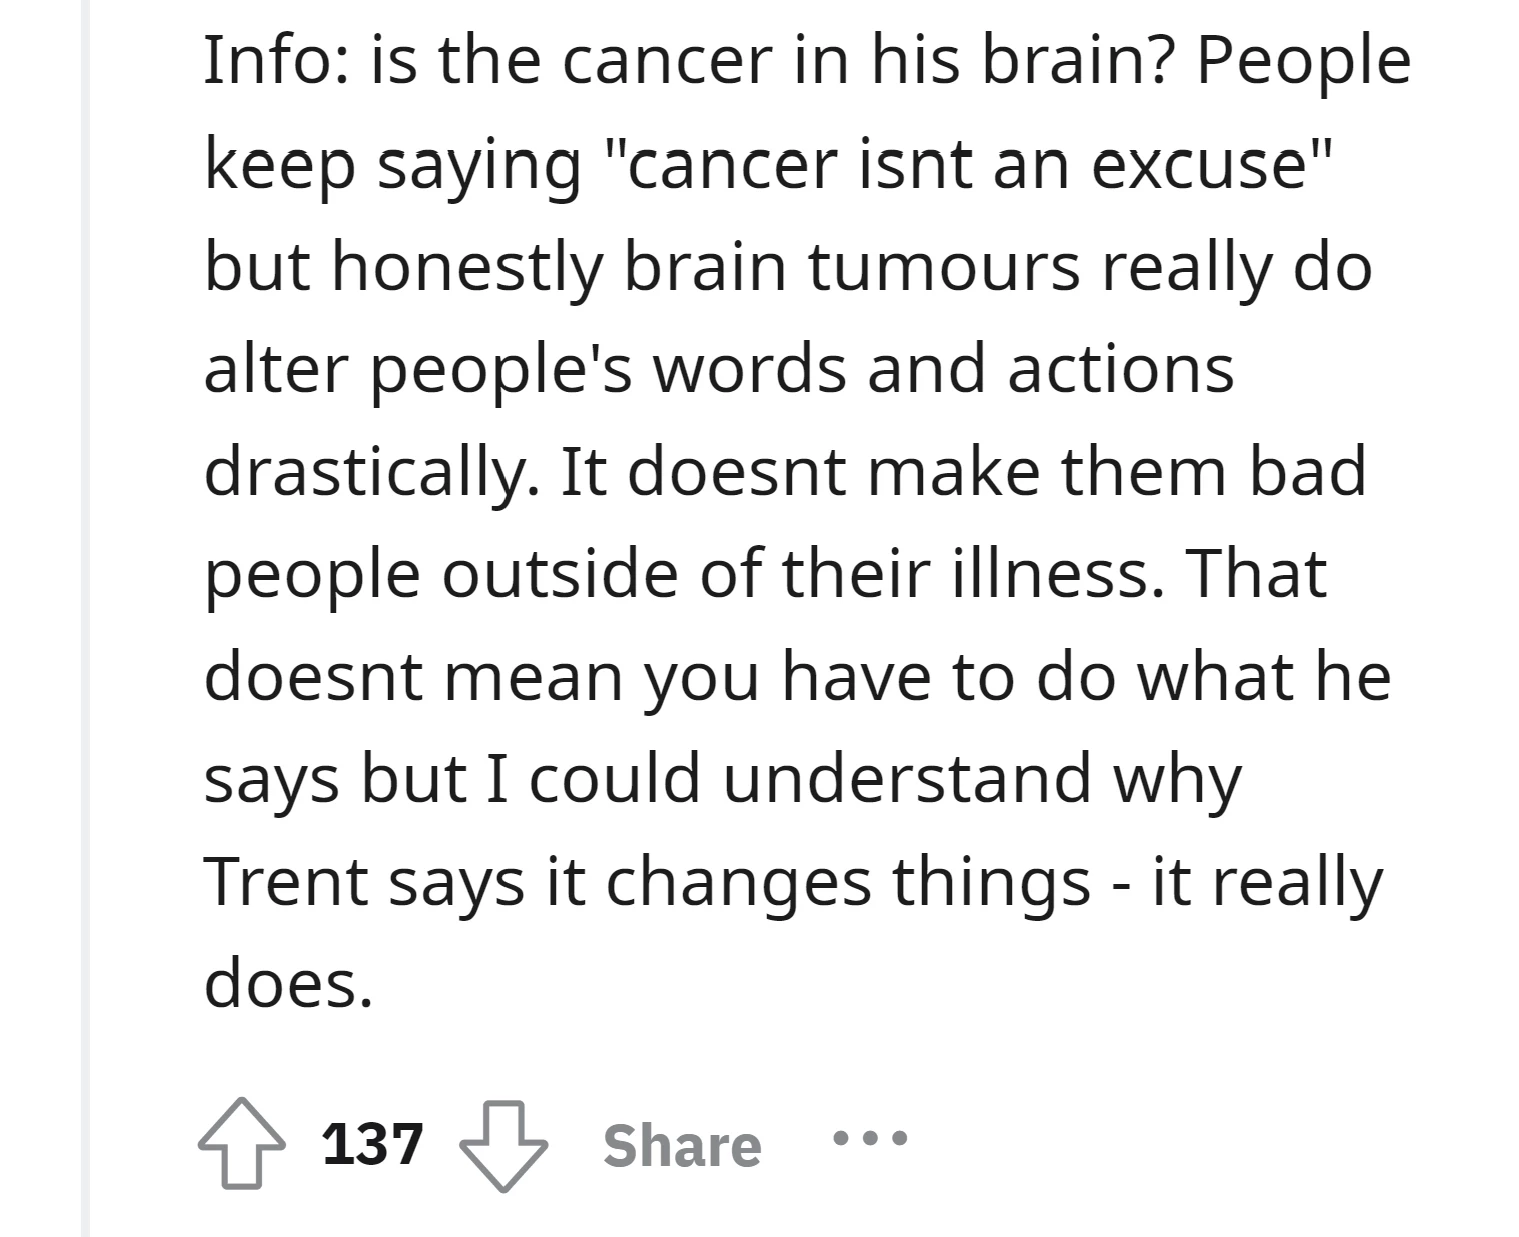 Could It Be Brain Tumours?